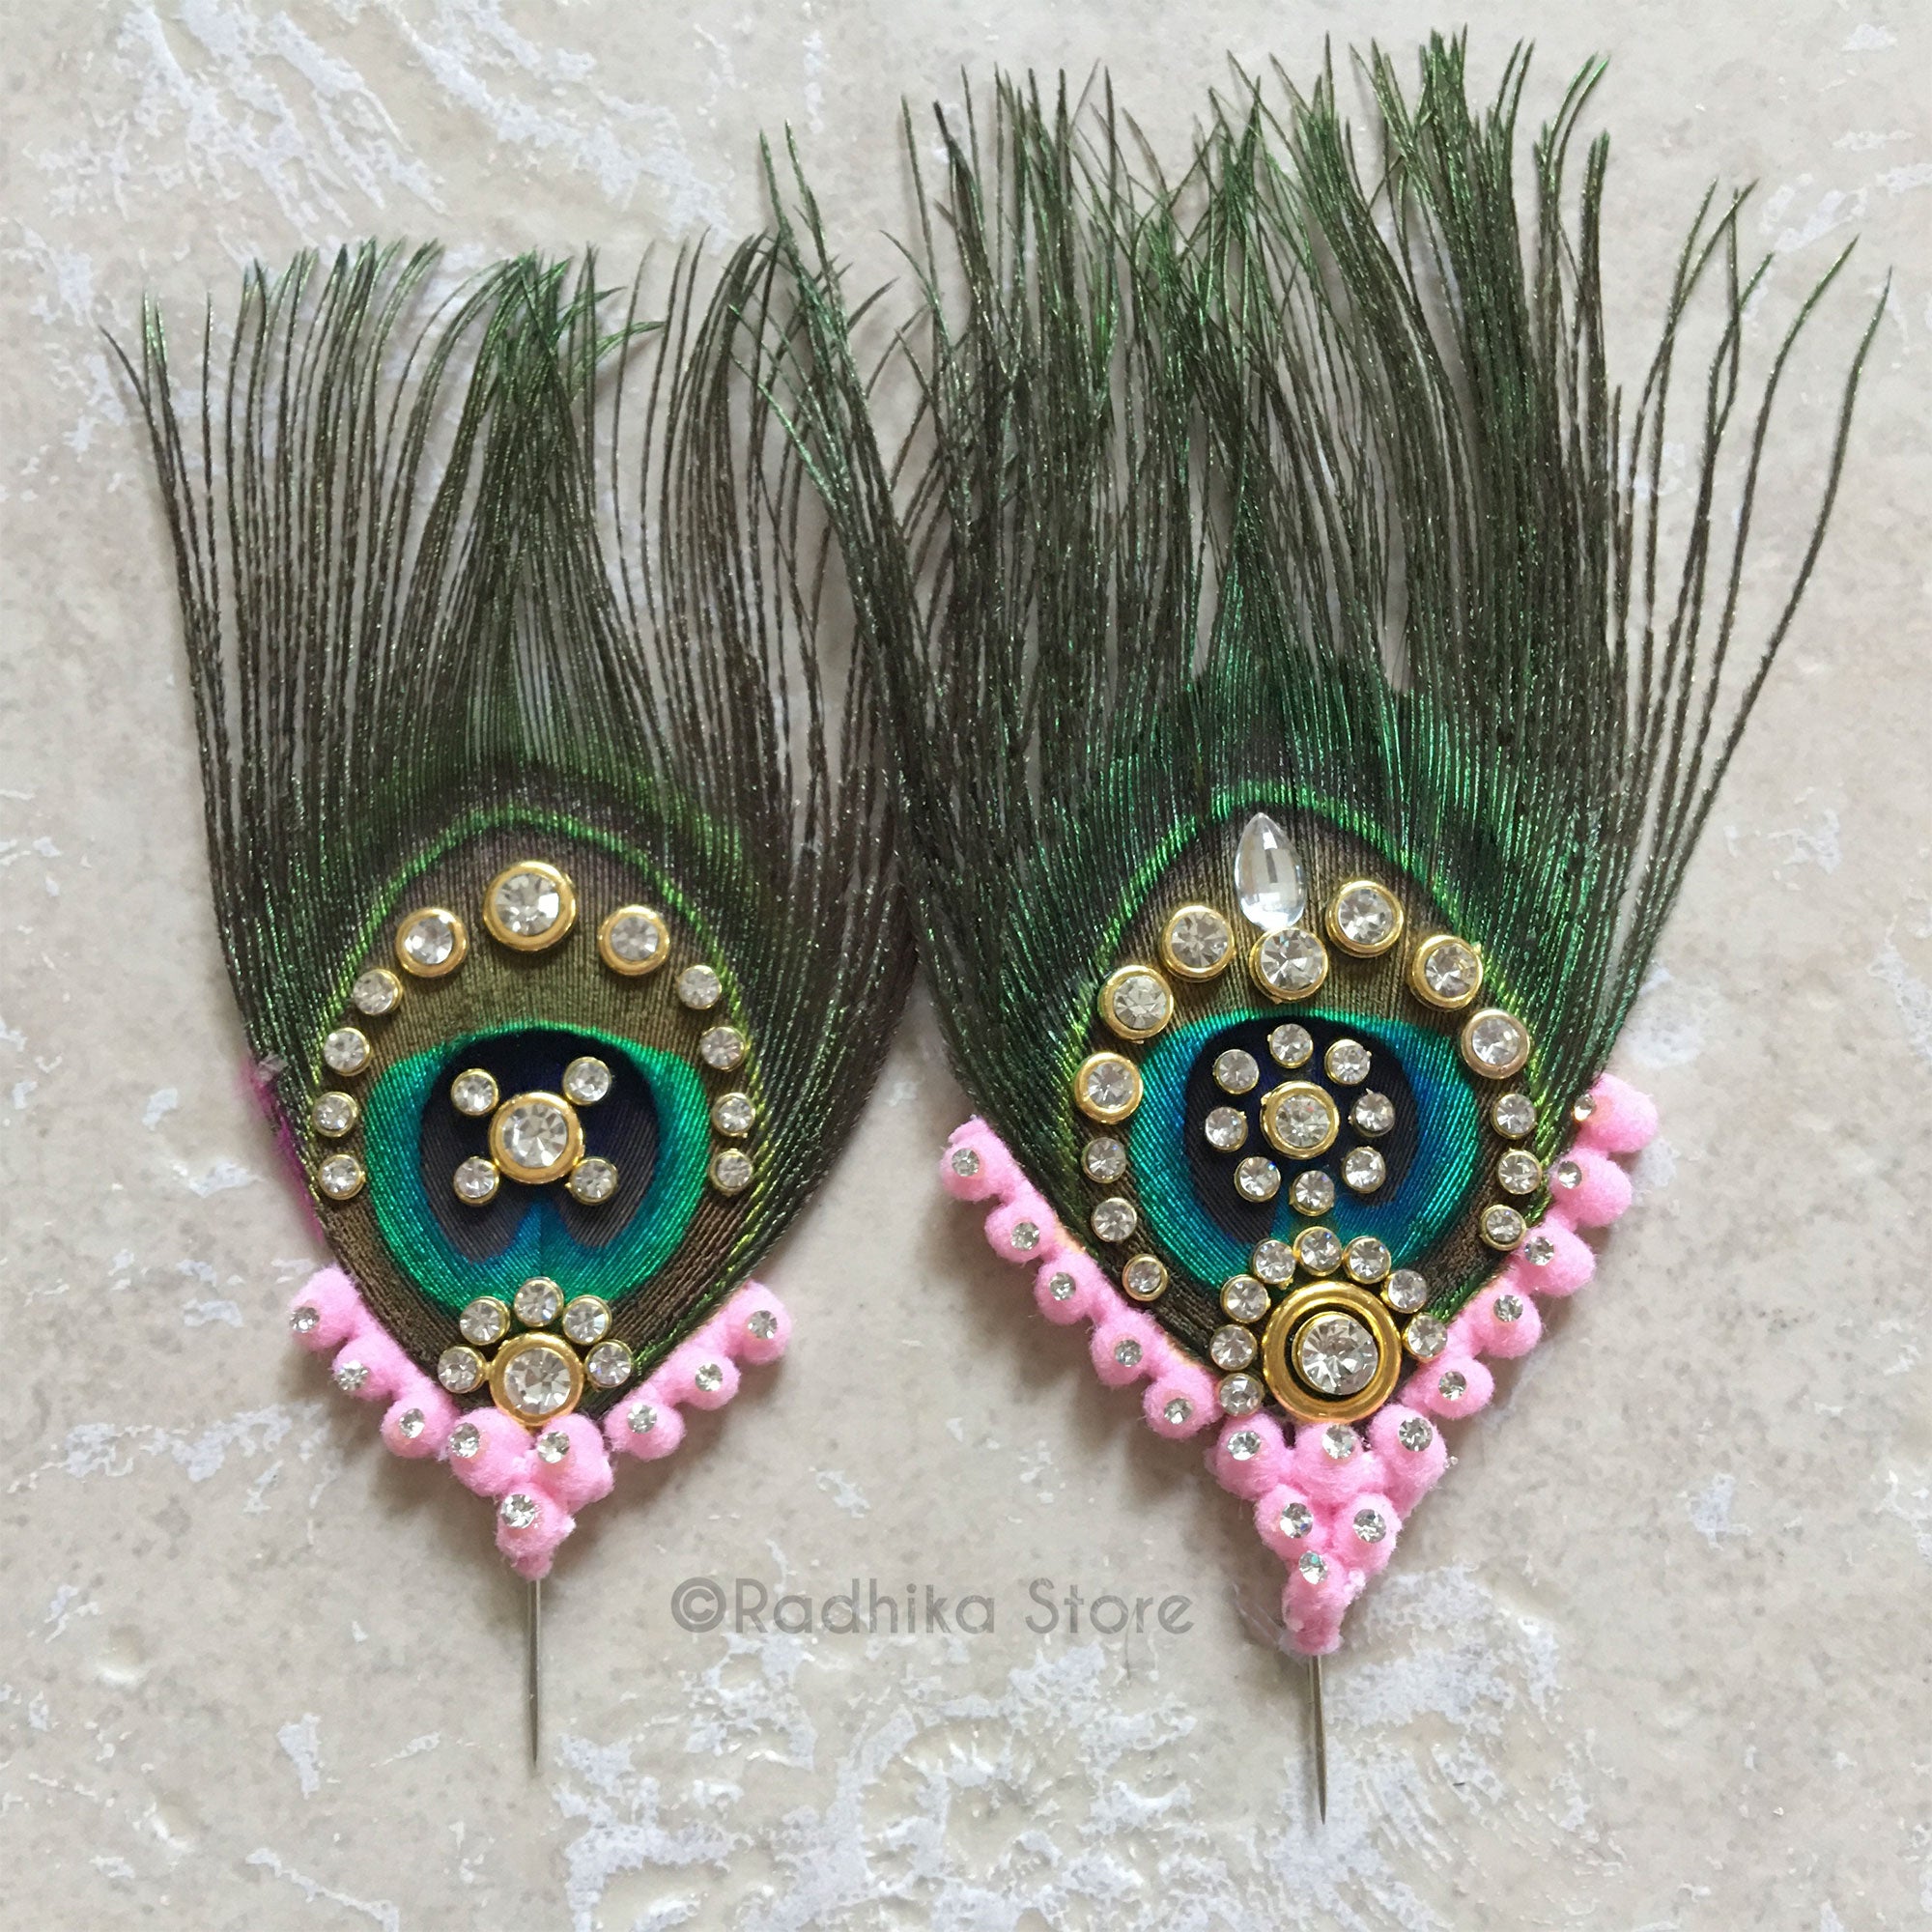 Extra Large Crystal Peacock Feathers - Pink Color